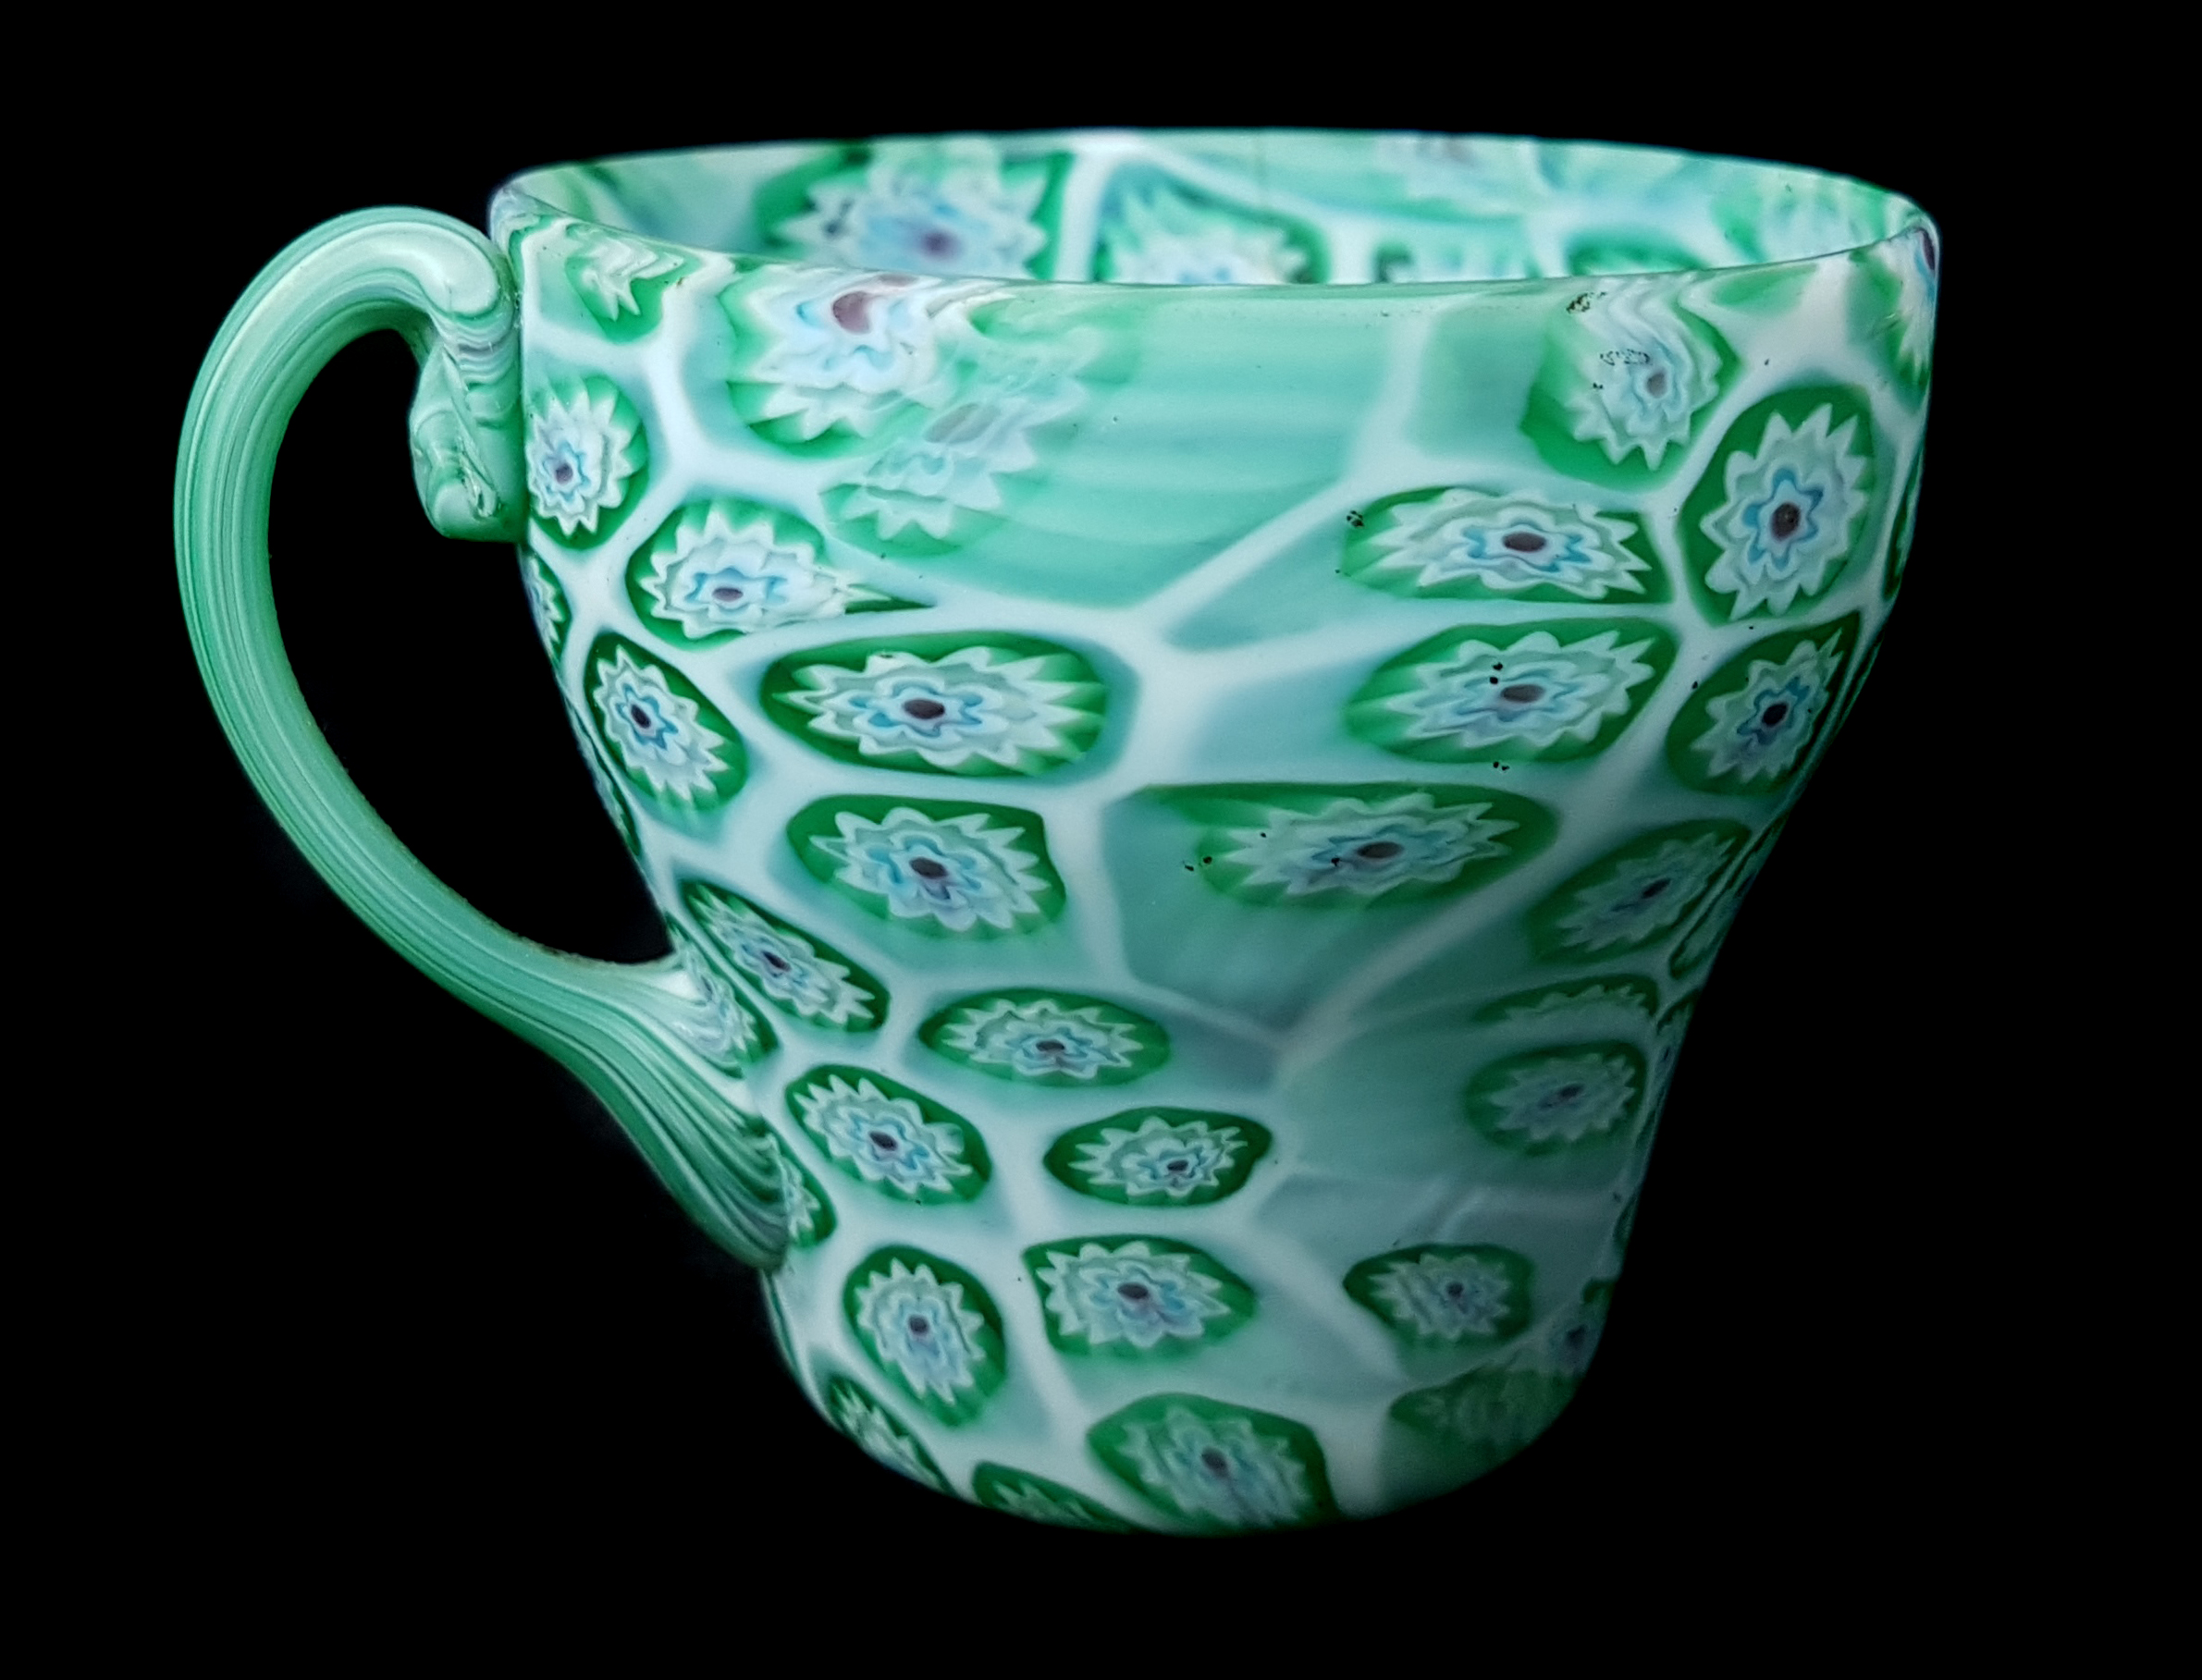 A Tosso brothers millifiori glass teacup and saucer, green and blue canes with red centres on a whit - Image 2 of 3